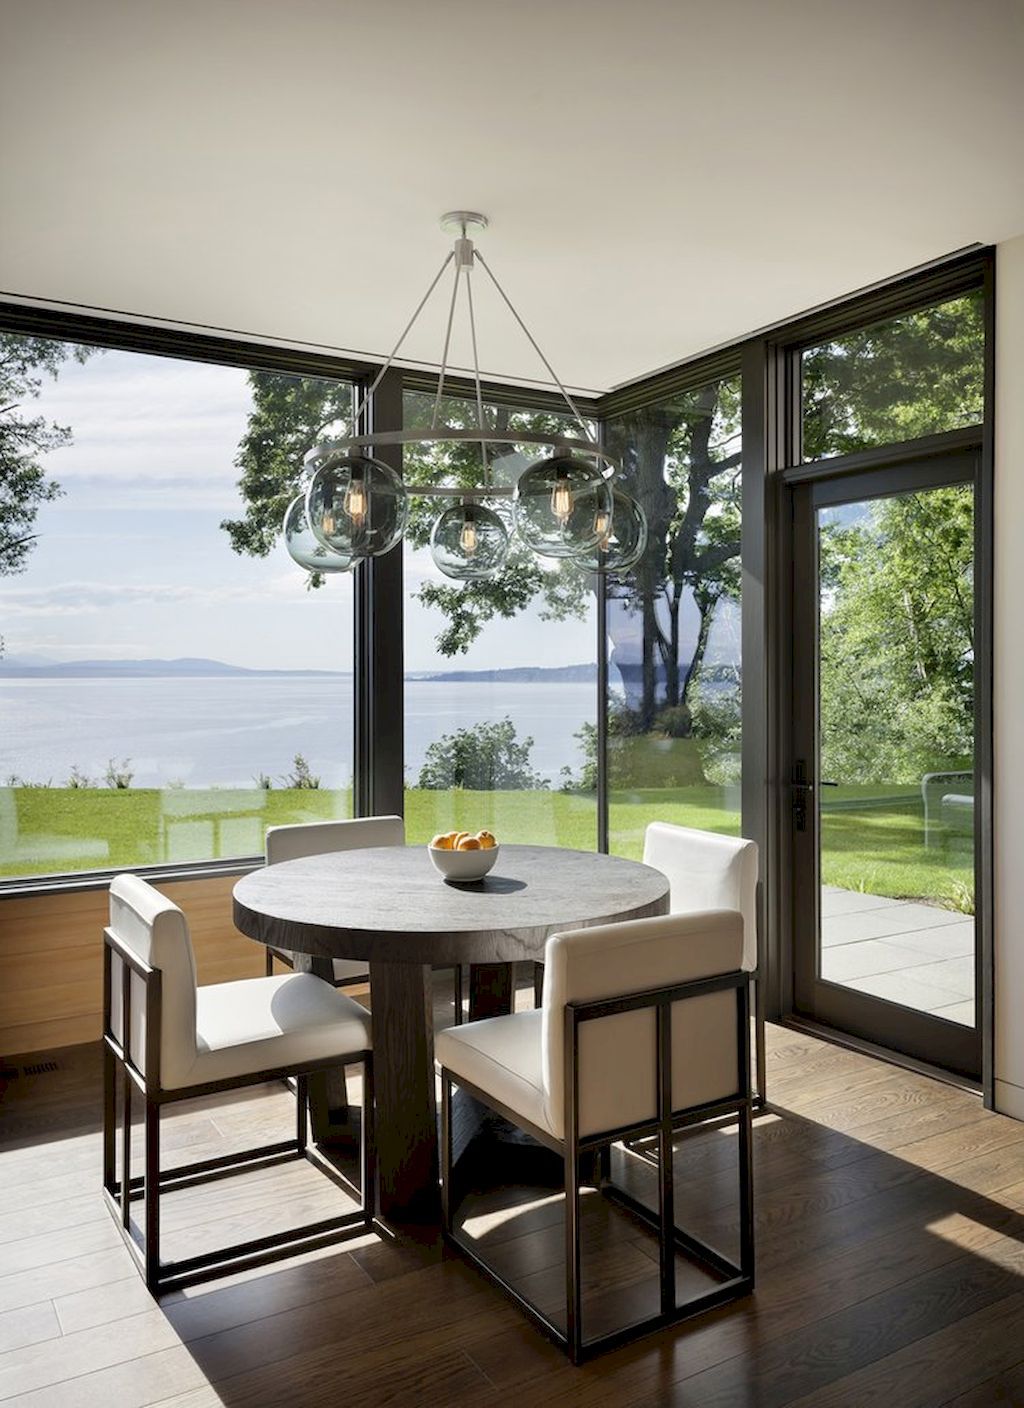 Whidbey Farmhouse, a Nature-inspired Oasis by DeForest Architects